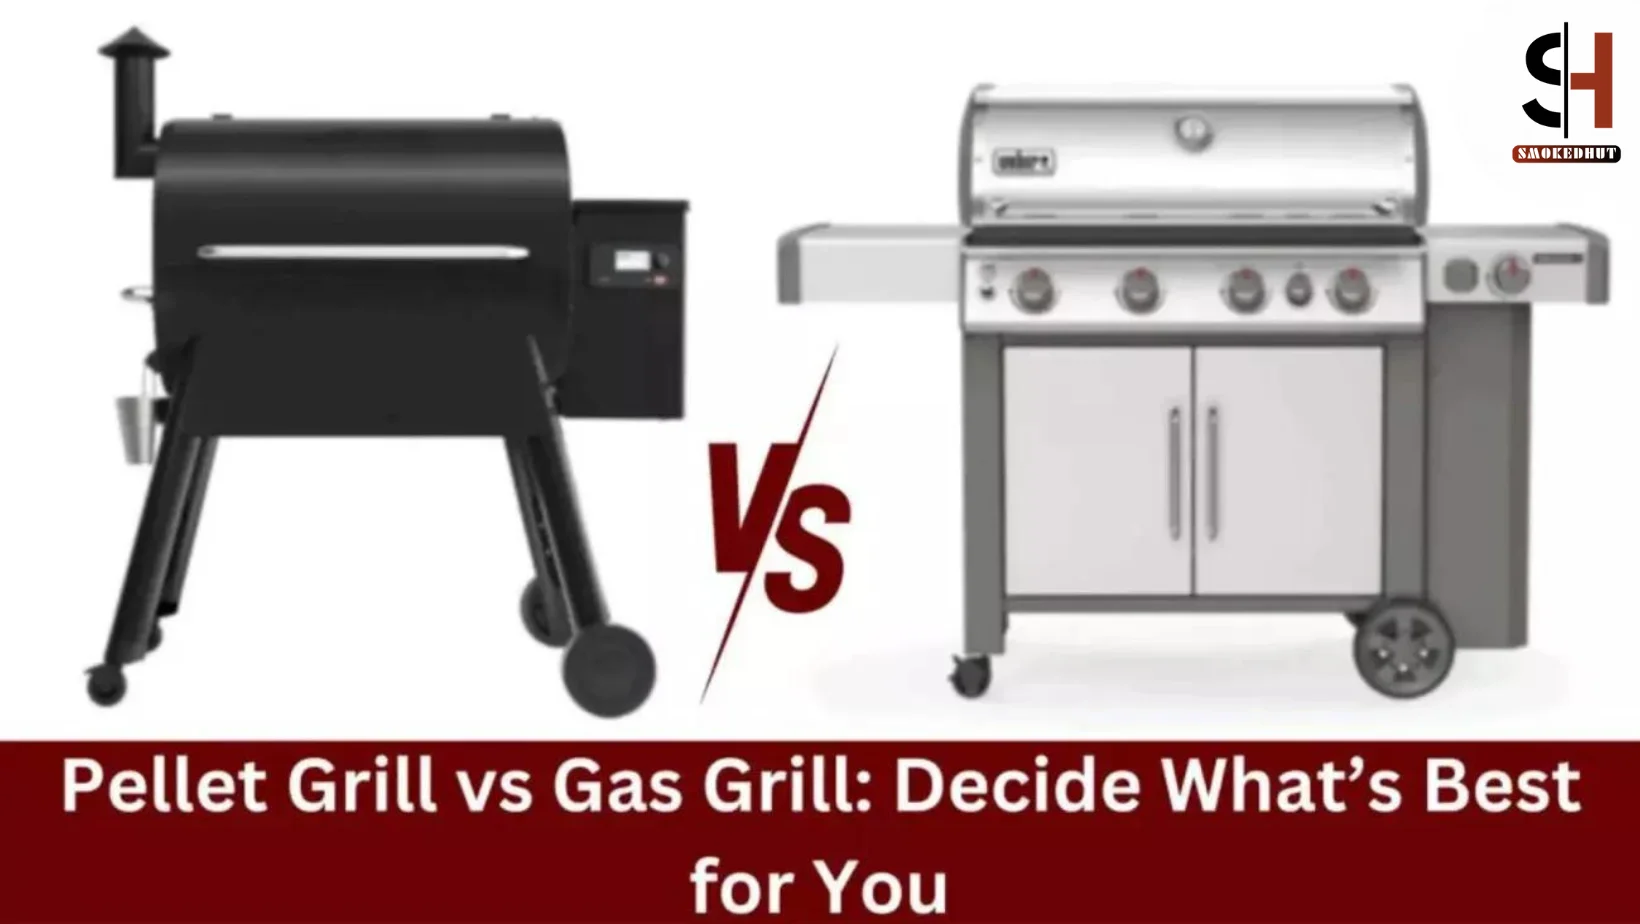 Pellet Grill vs Gas Grill Decide What’s Best for You